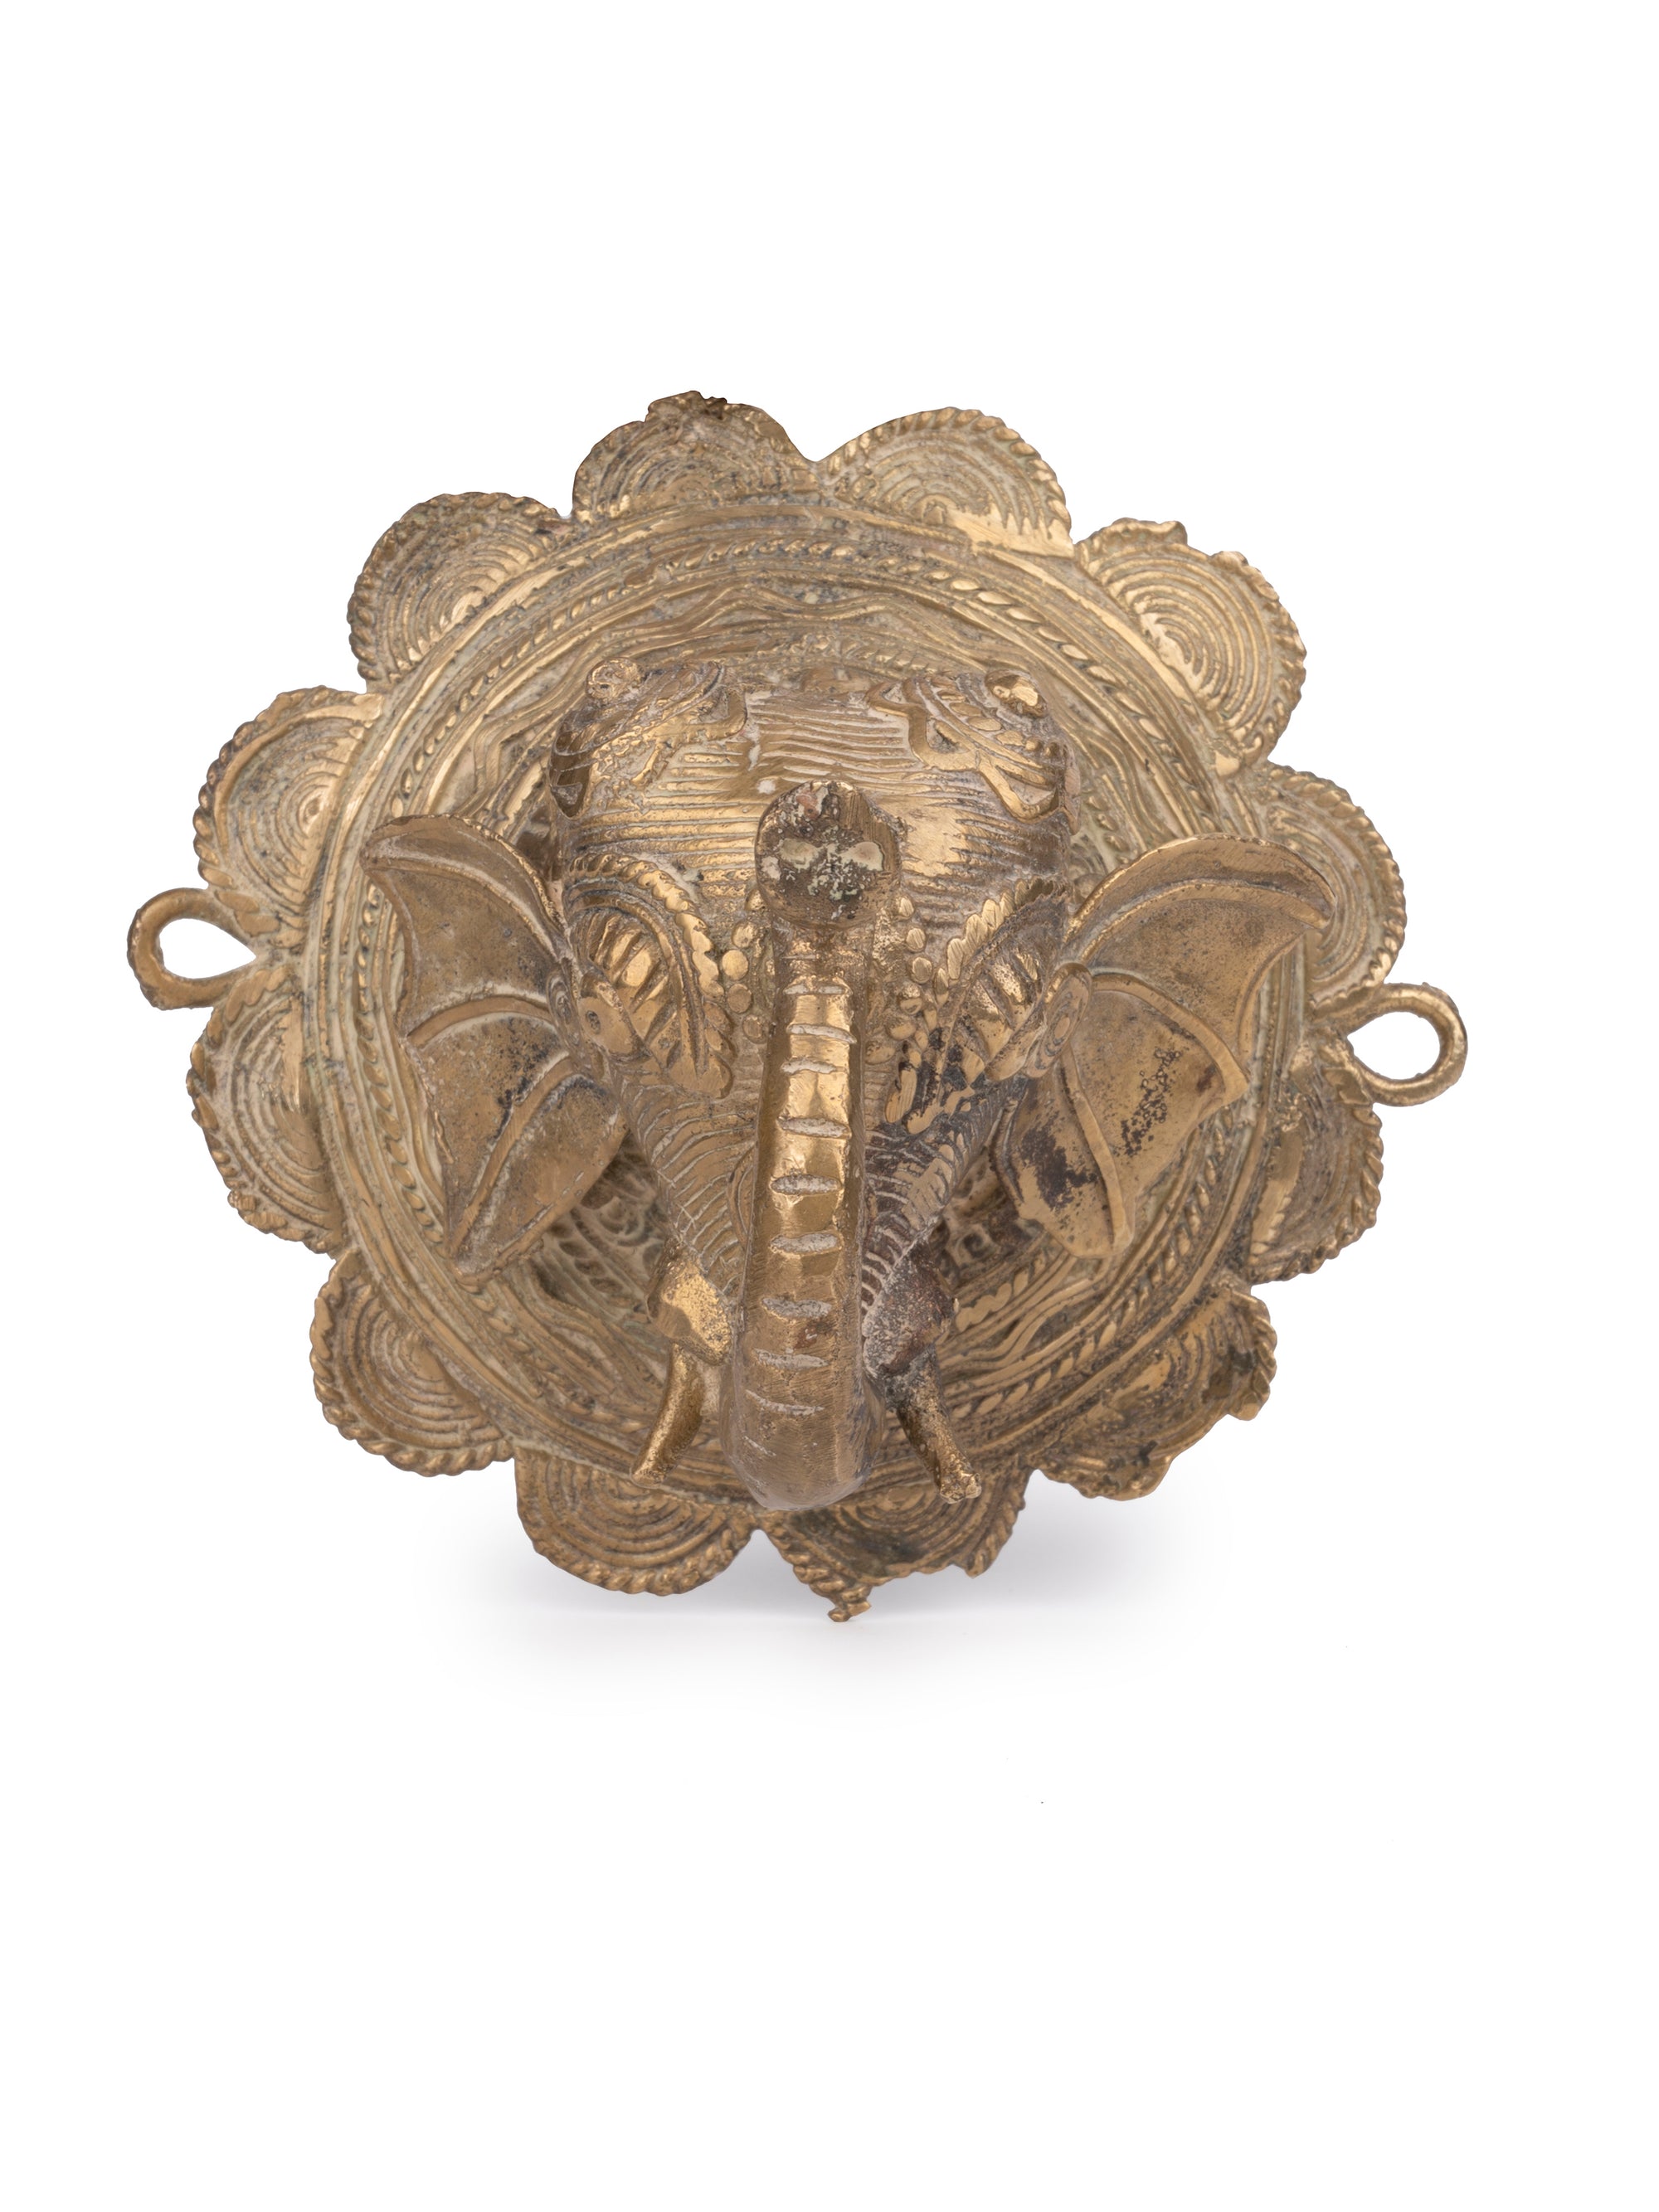 Dokra Art Elephant Head Wall Hanging made of Brass metal - Small 4 inches - The Heritage Artifacts